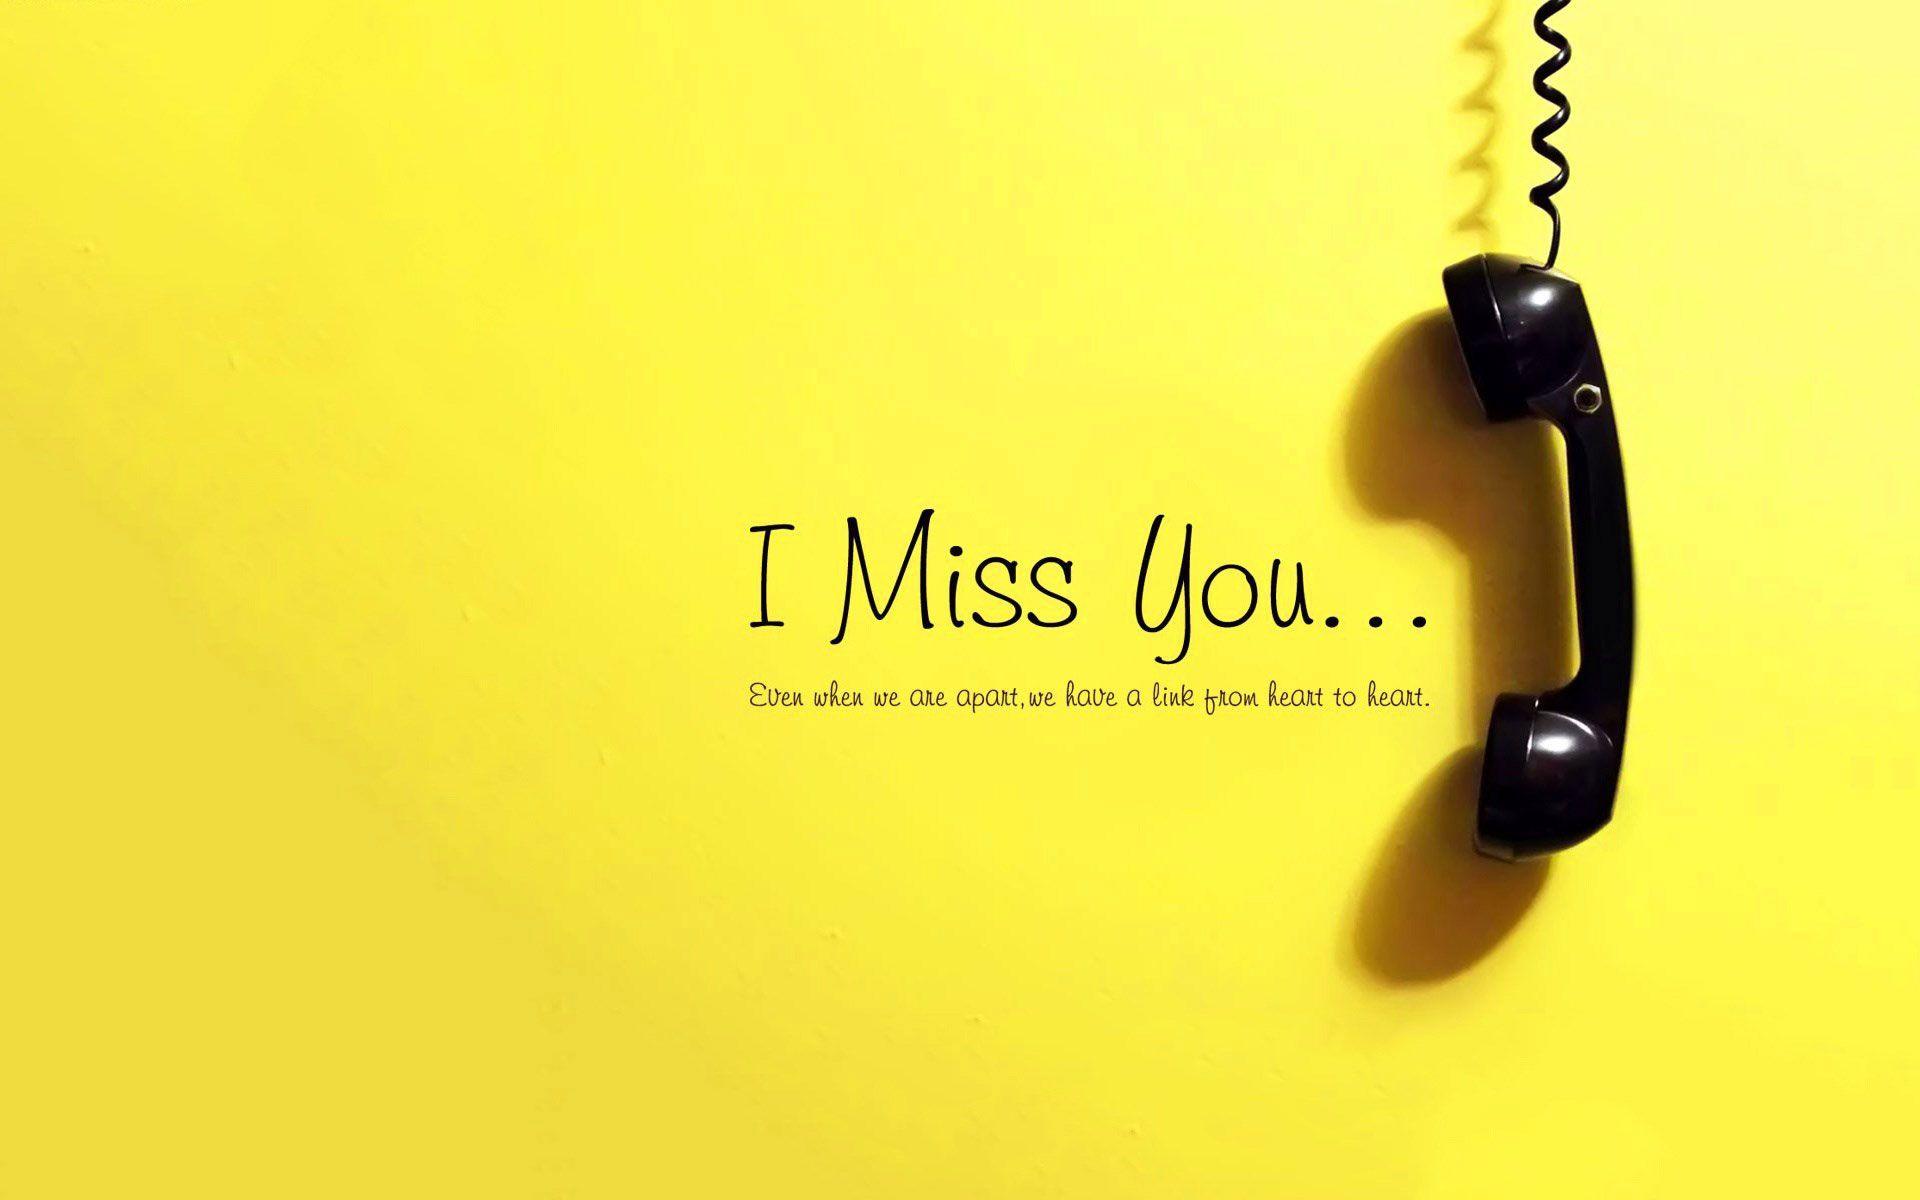 miss u image with quotes. I miss you wallpaper, Miss you